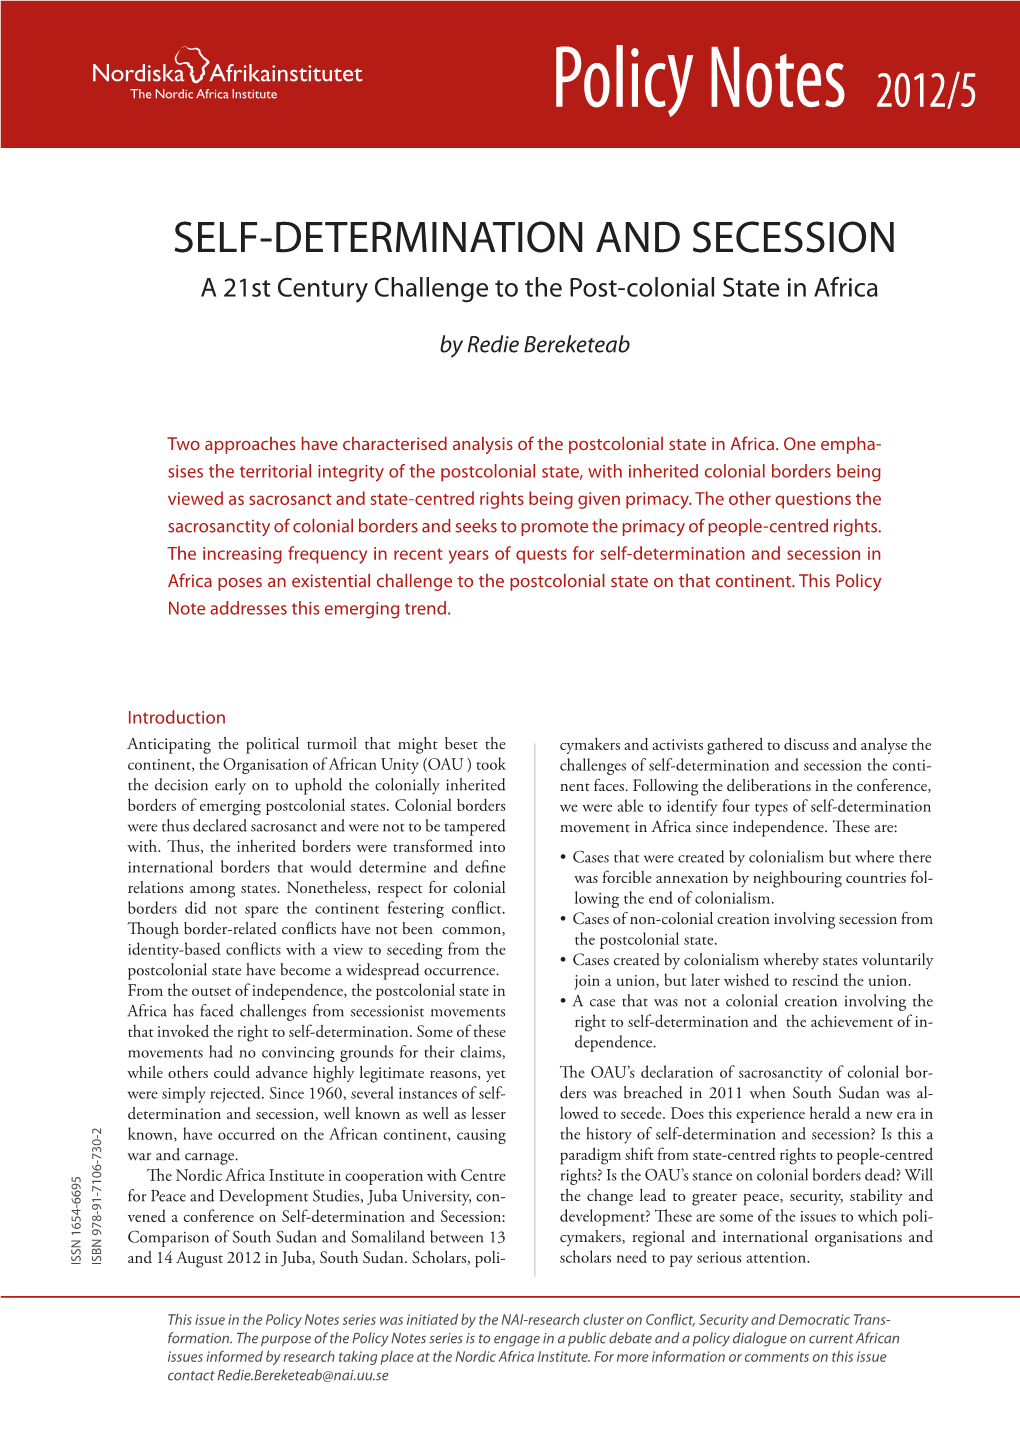 SELF-DETERMINATION and SECESSION a 21St Century Challenge to the Post-Colonial State in Africa